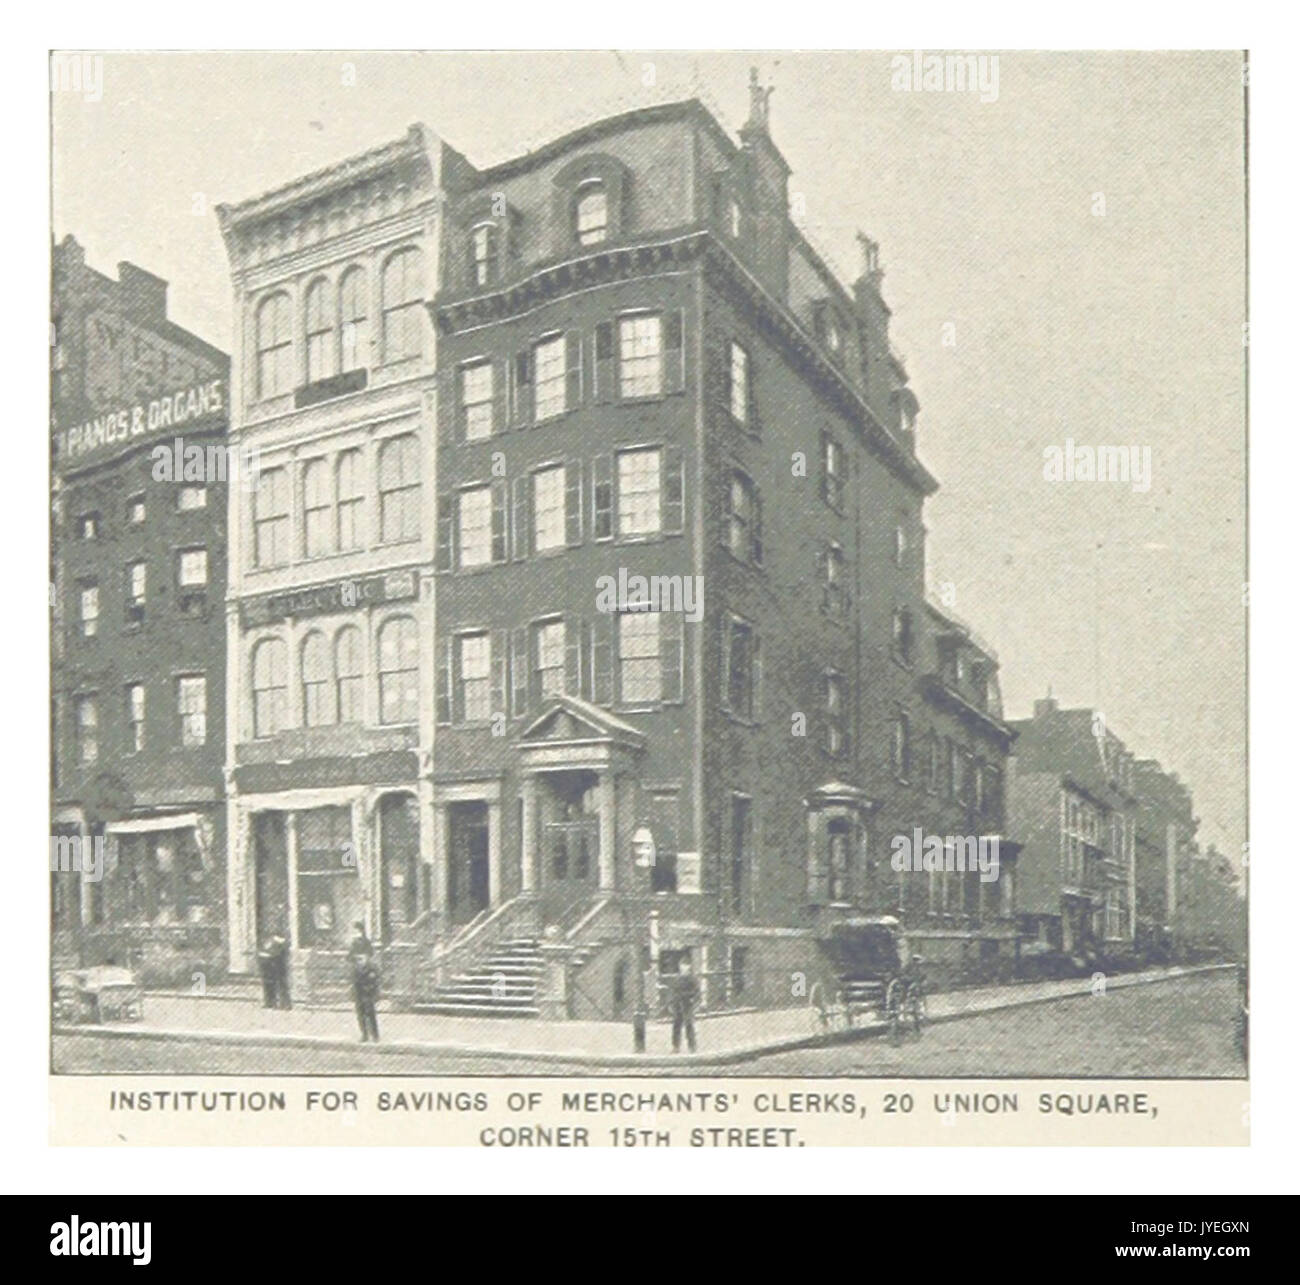 (King1893NYC) pg784 INSTITUTION FOR SAVINGS OF MERCHANTS' CLERKS, 20 UNION SQUARE CORNER 15TH STREET Stock Photo